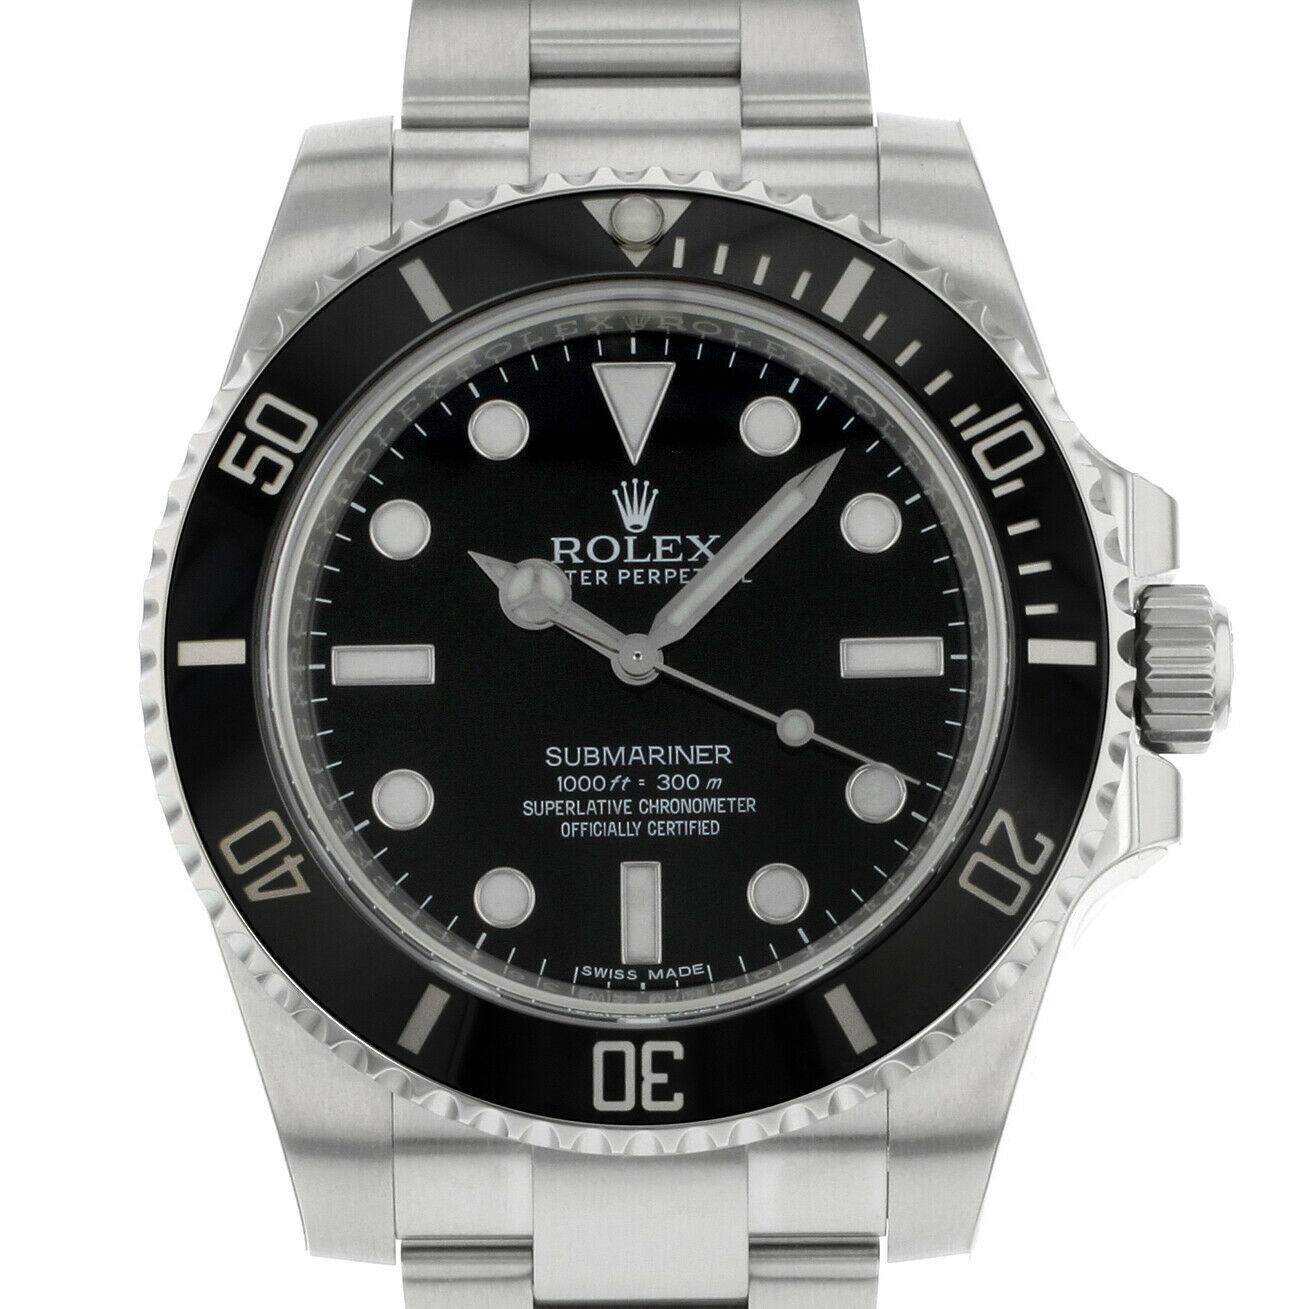 This pre-owned Rolex Submariner 114060 is a beautiful men's timepiece that is powered by an automatic movement which is cased in a stainless steel case. It has a round shape face, no features dial and has hand sticks & dots style markers. It is